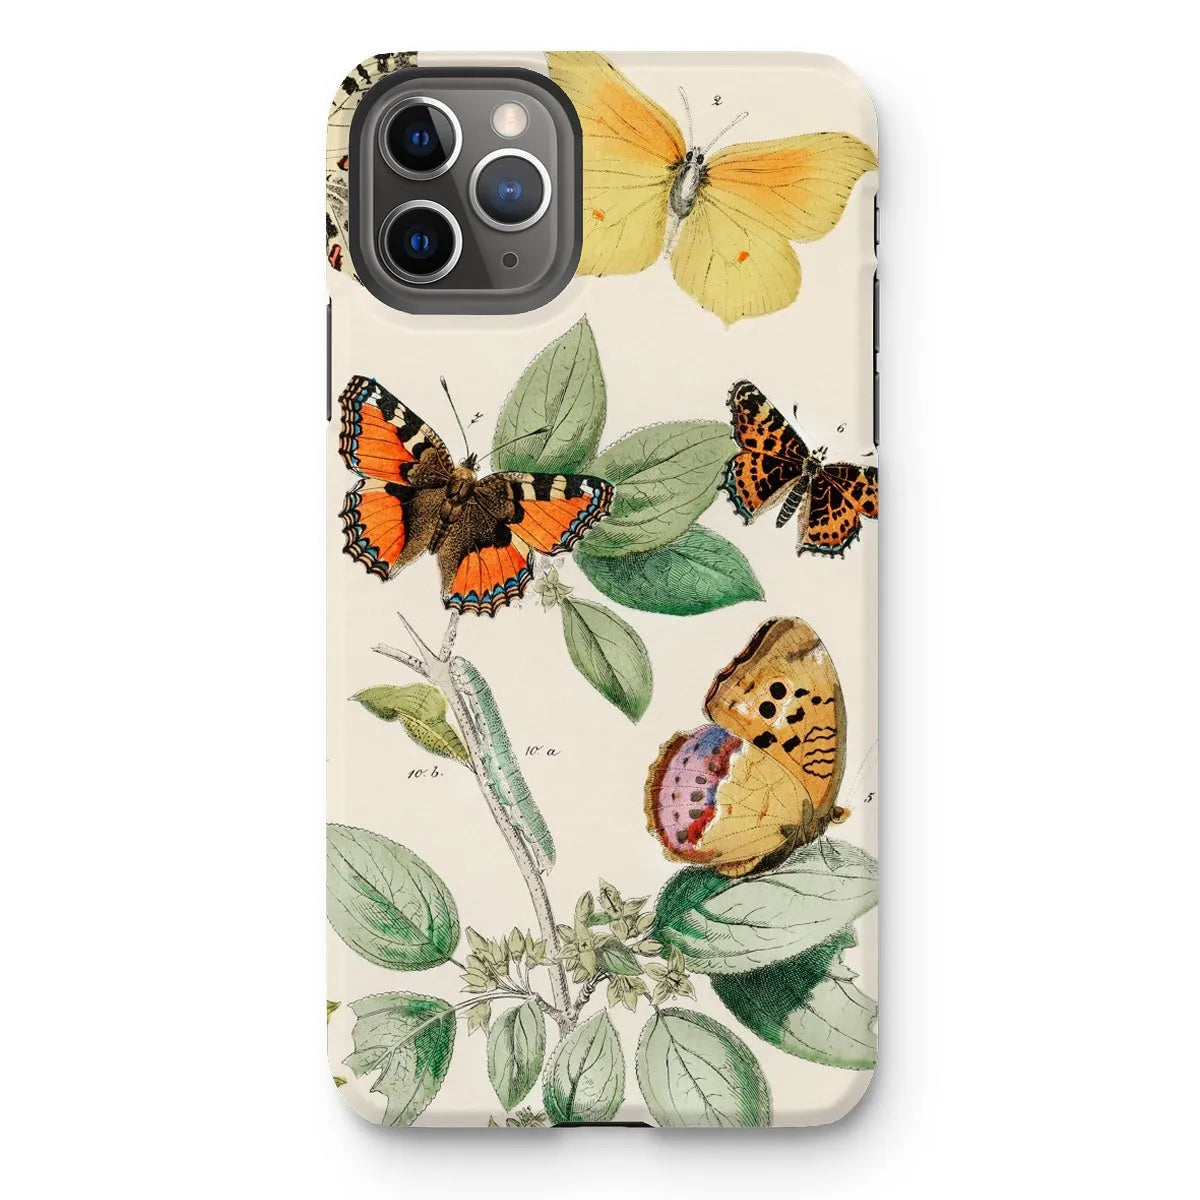 Butterfly Aesthetic Art Phone Case - William Forsell Kirby - Iphone 11 Pro Max / Matte - Mobile Phone Cases - Aesthetic